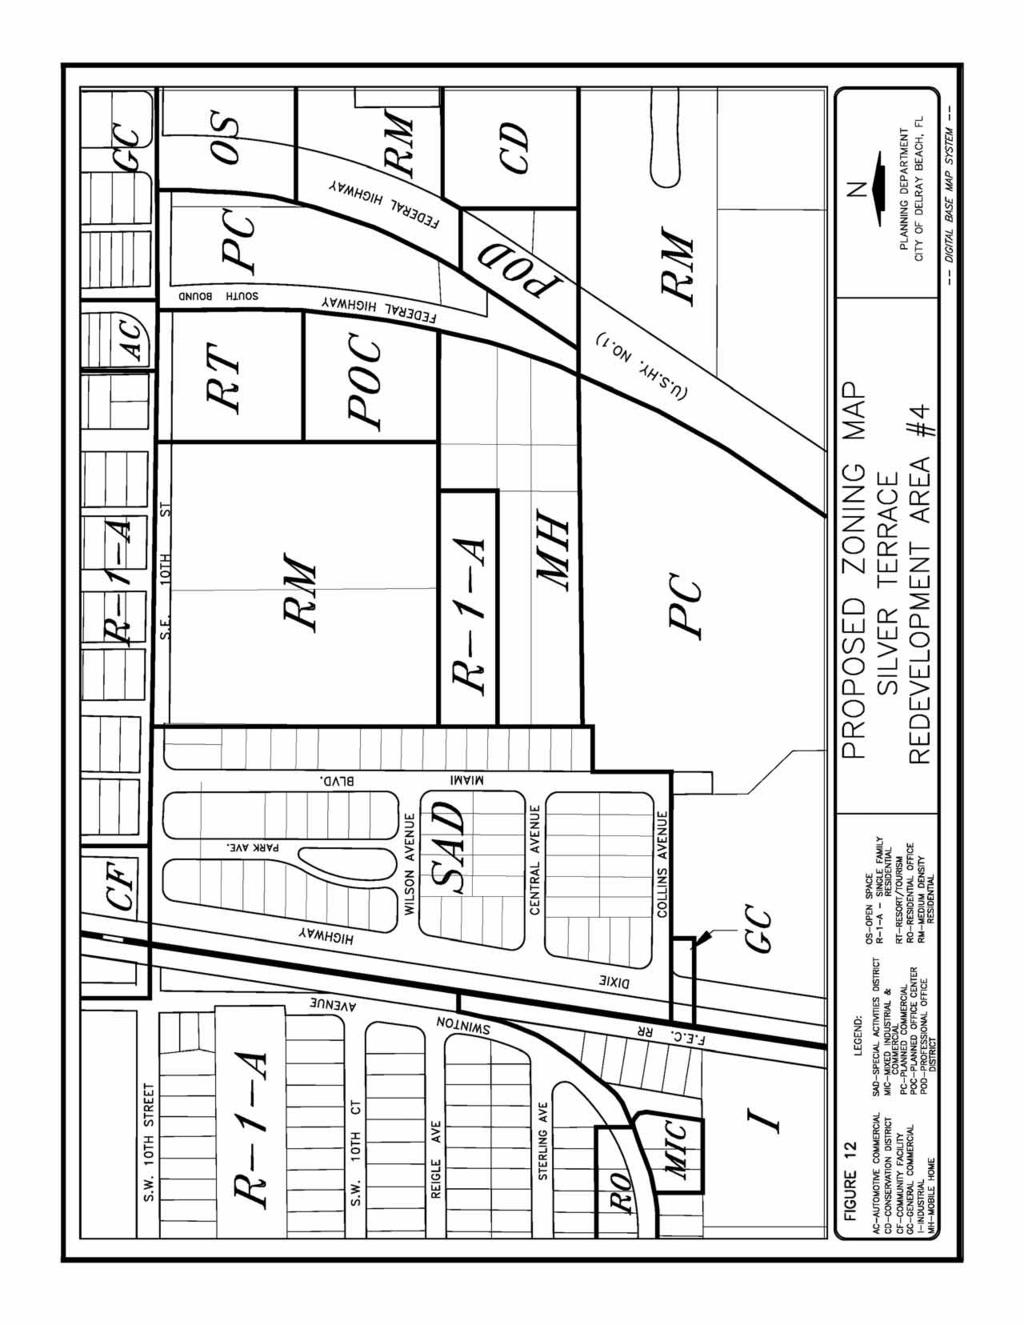 Figure 12: Proposed Zoning